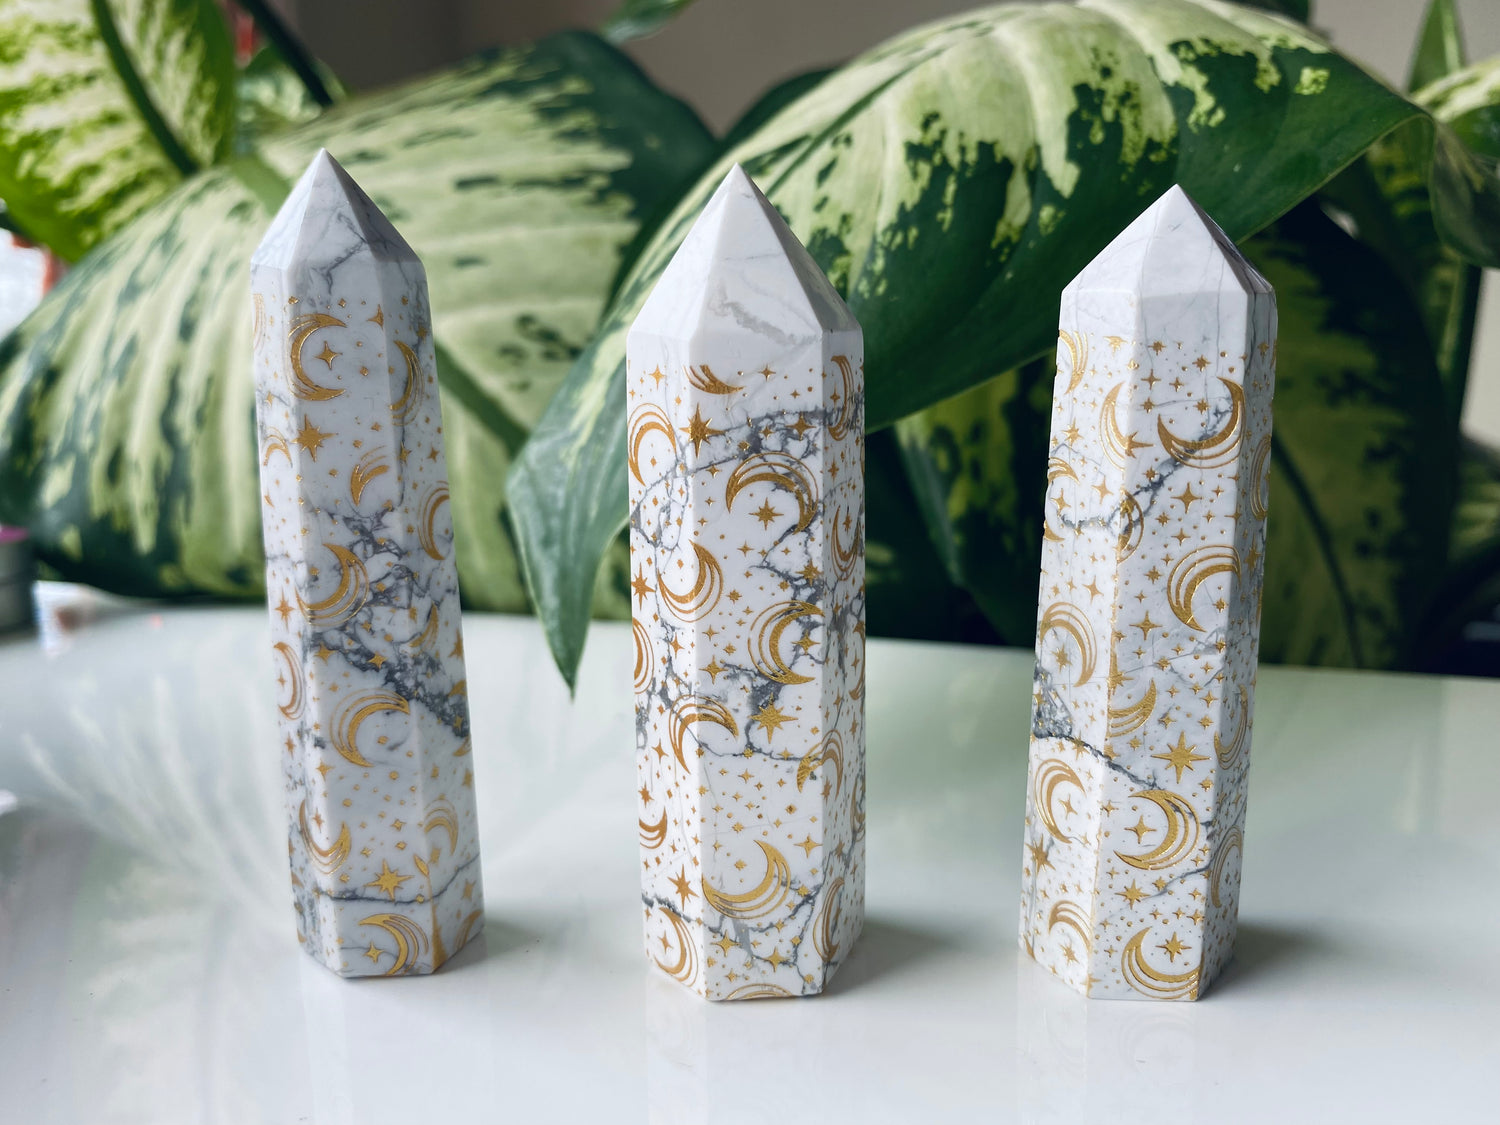 Etched Howlite Tower - Moon Room Shop and Wellness